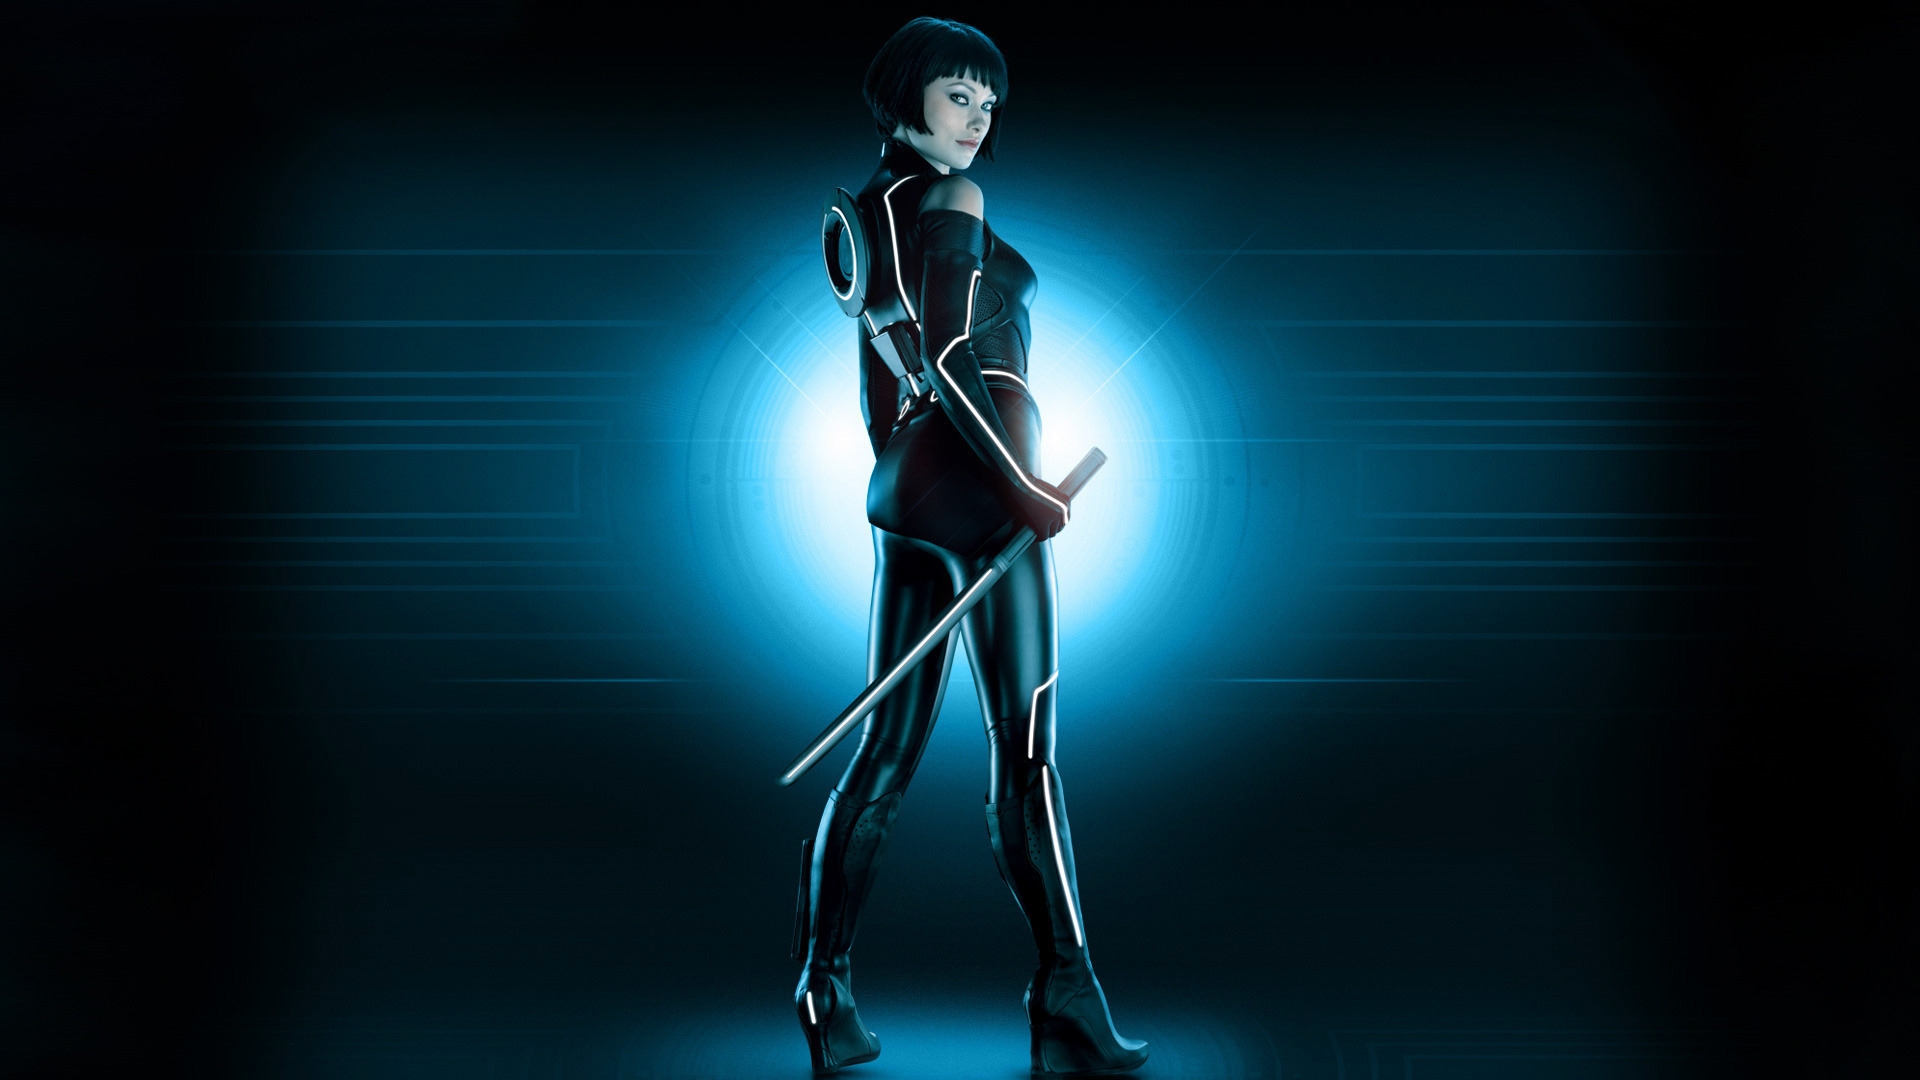 Olivia Wilde Tron Legacy for 1920 x 1080 HDTV 1080p resolution